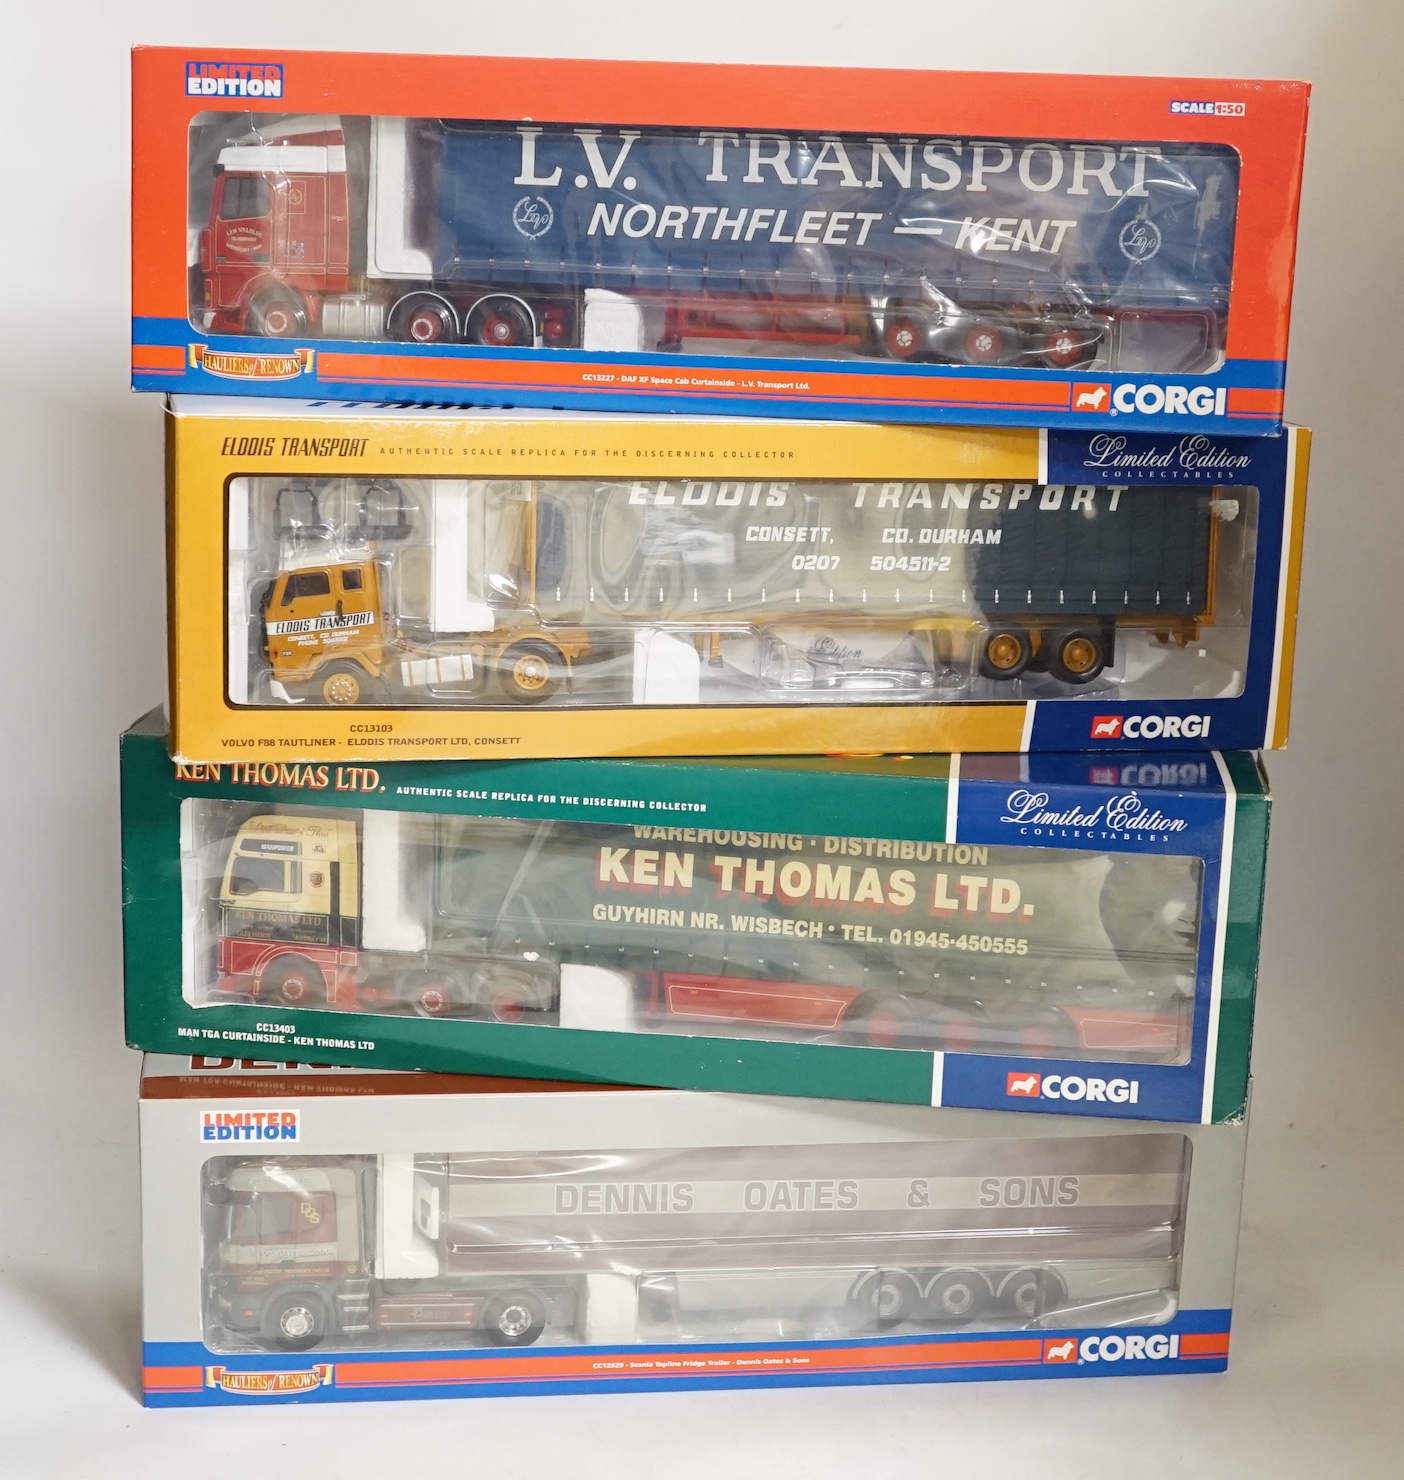 Four boxed Corgi 1:50 scale articulated trucks; a DAF XF Space Cab Curtainside lorry (CC13227), a MAN TGA curtainside lorry (CC13403), a Scania Topline with Fridge Trailer (CC12929) and a Volvo F88 Tautliner curtainside